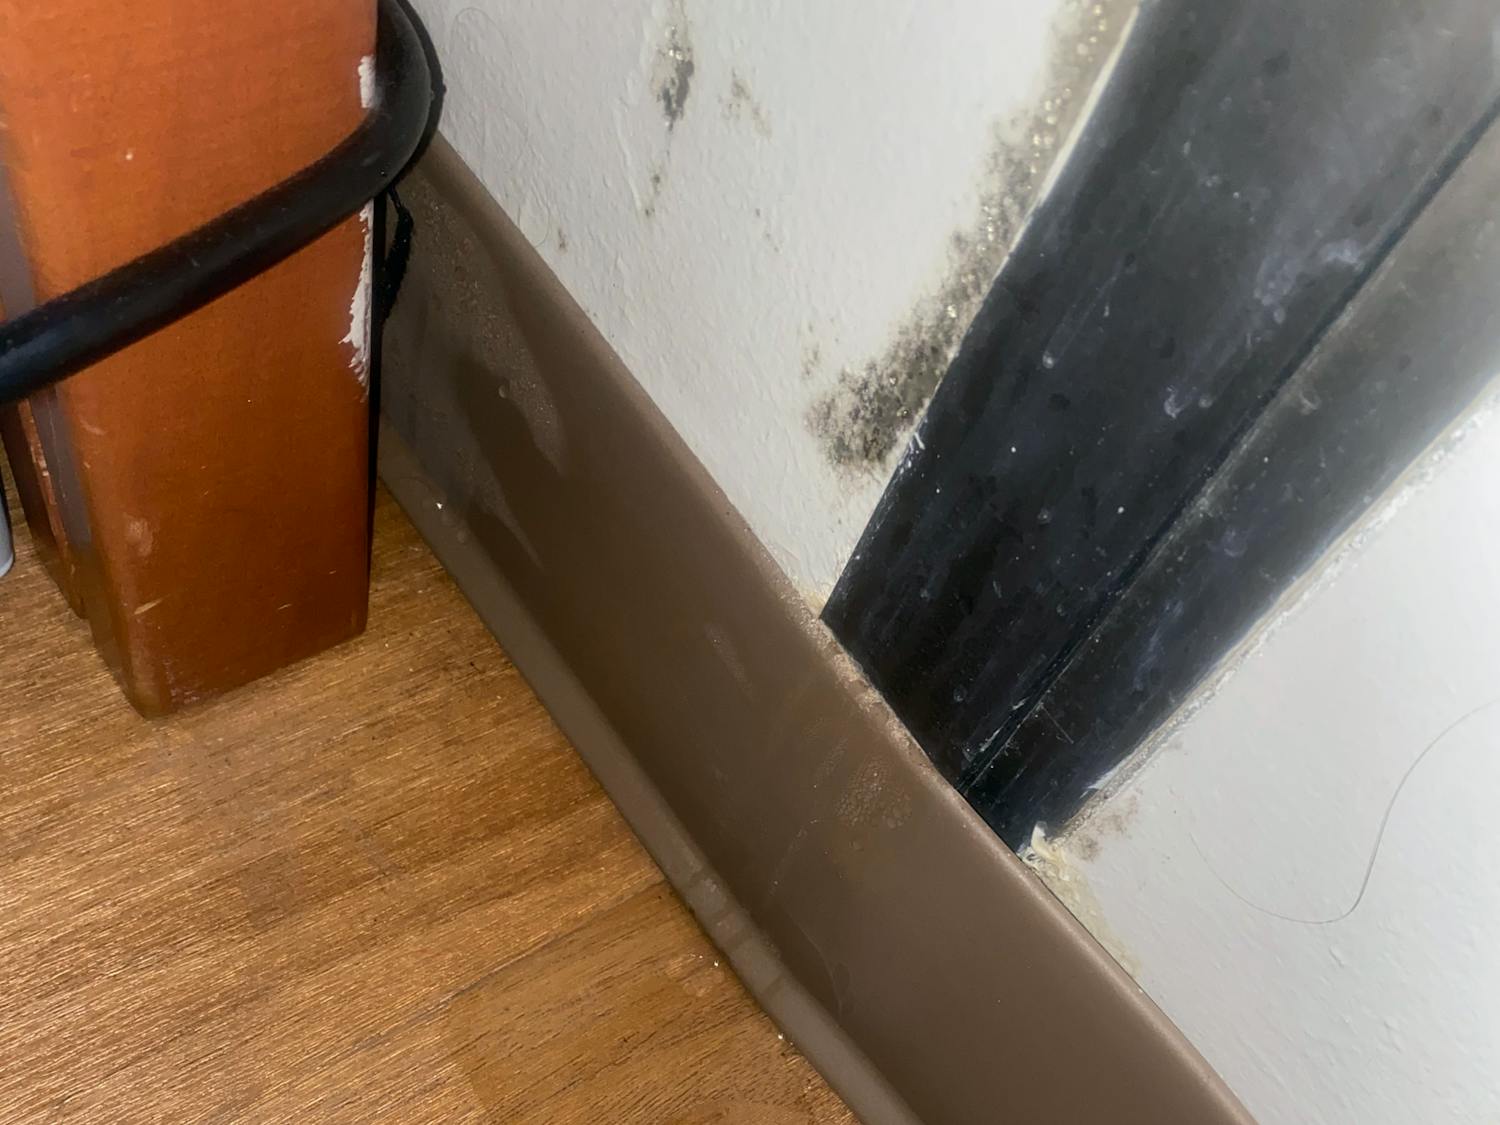 Mold along the walls of a dorm room in Capstone House in January 2021. Fourth-year public health student Kendall Guthrie found the mold when returning to campus after winter break.